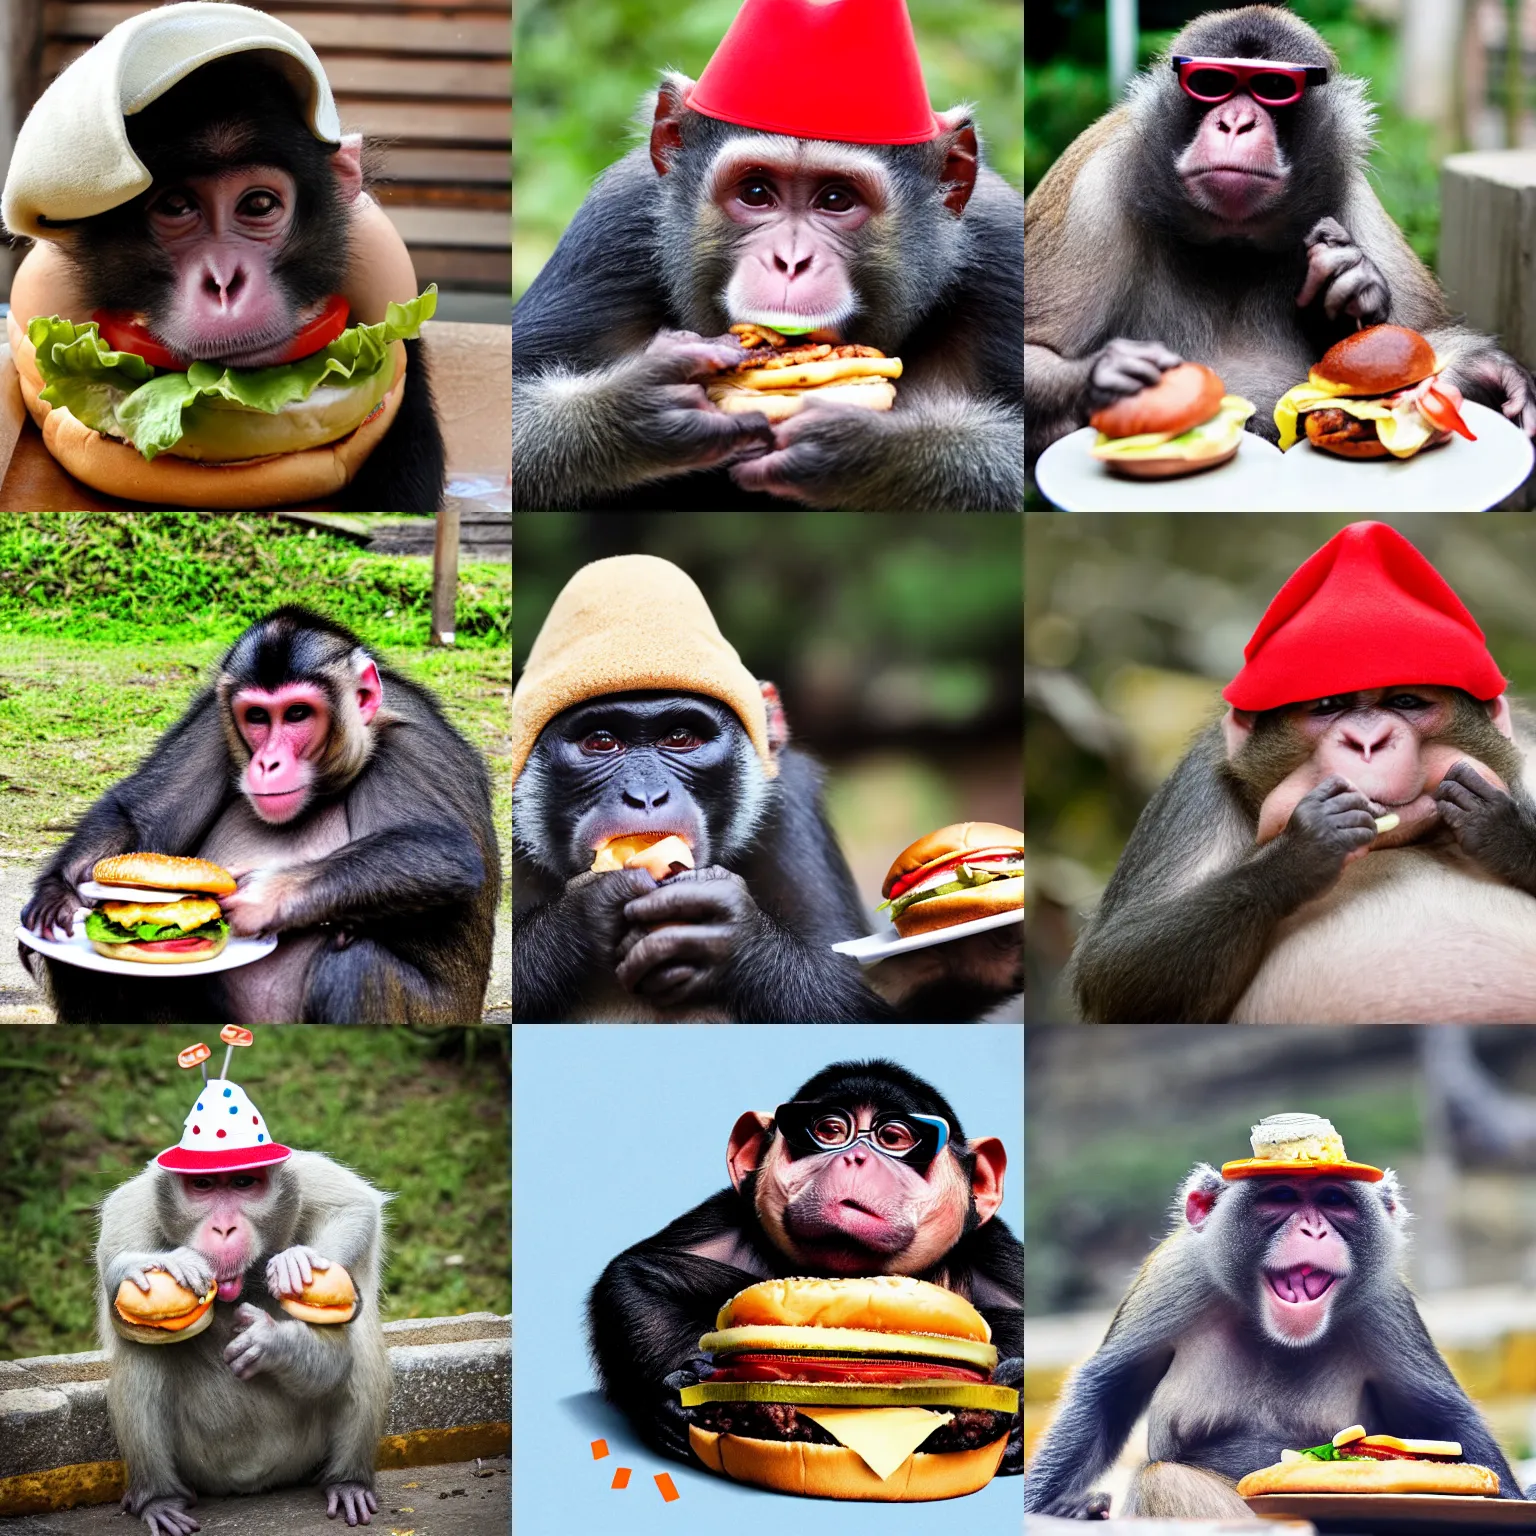 Prompt: a photo of a morbidly obese monkey eating Burger wearing cool hat